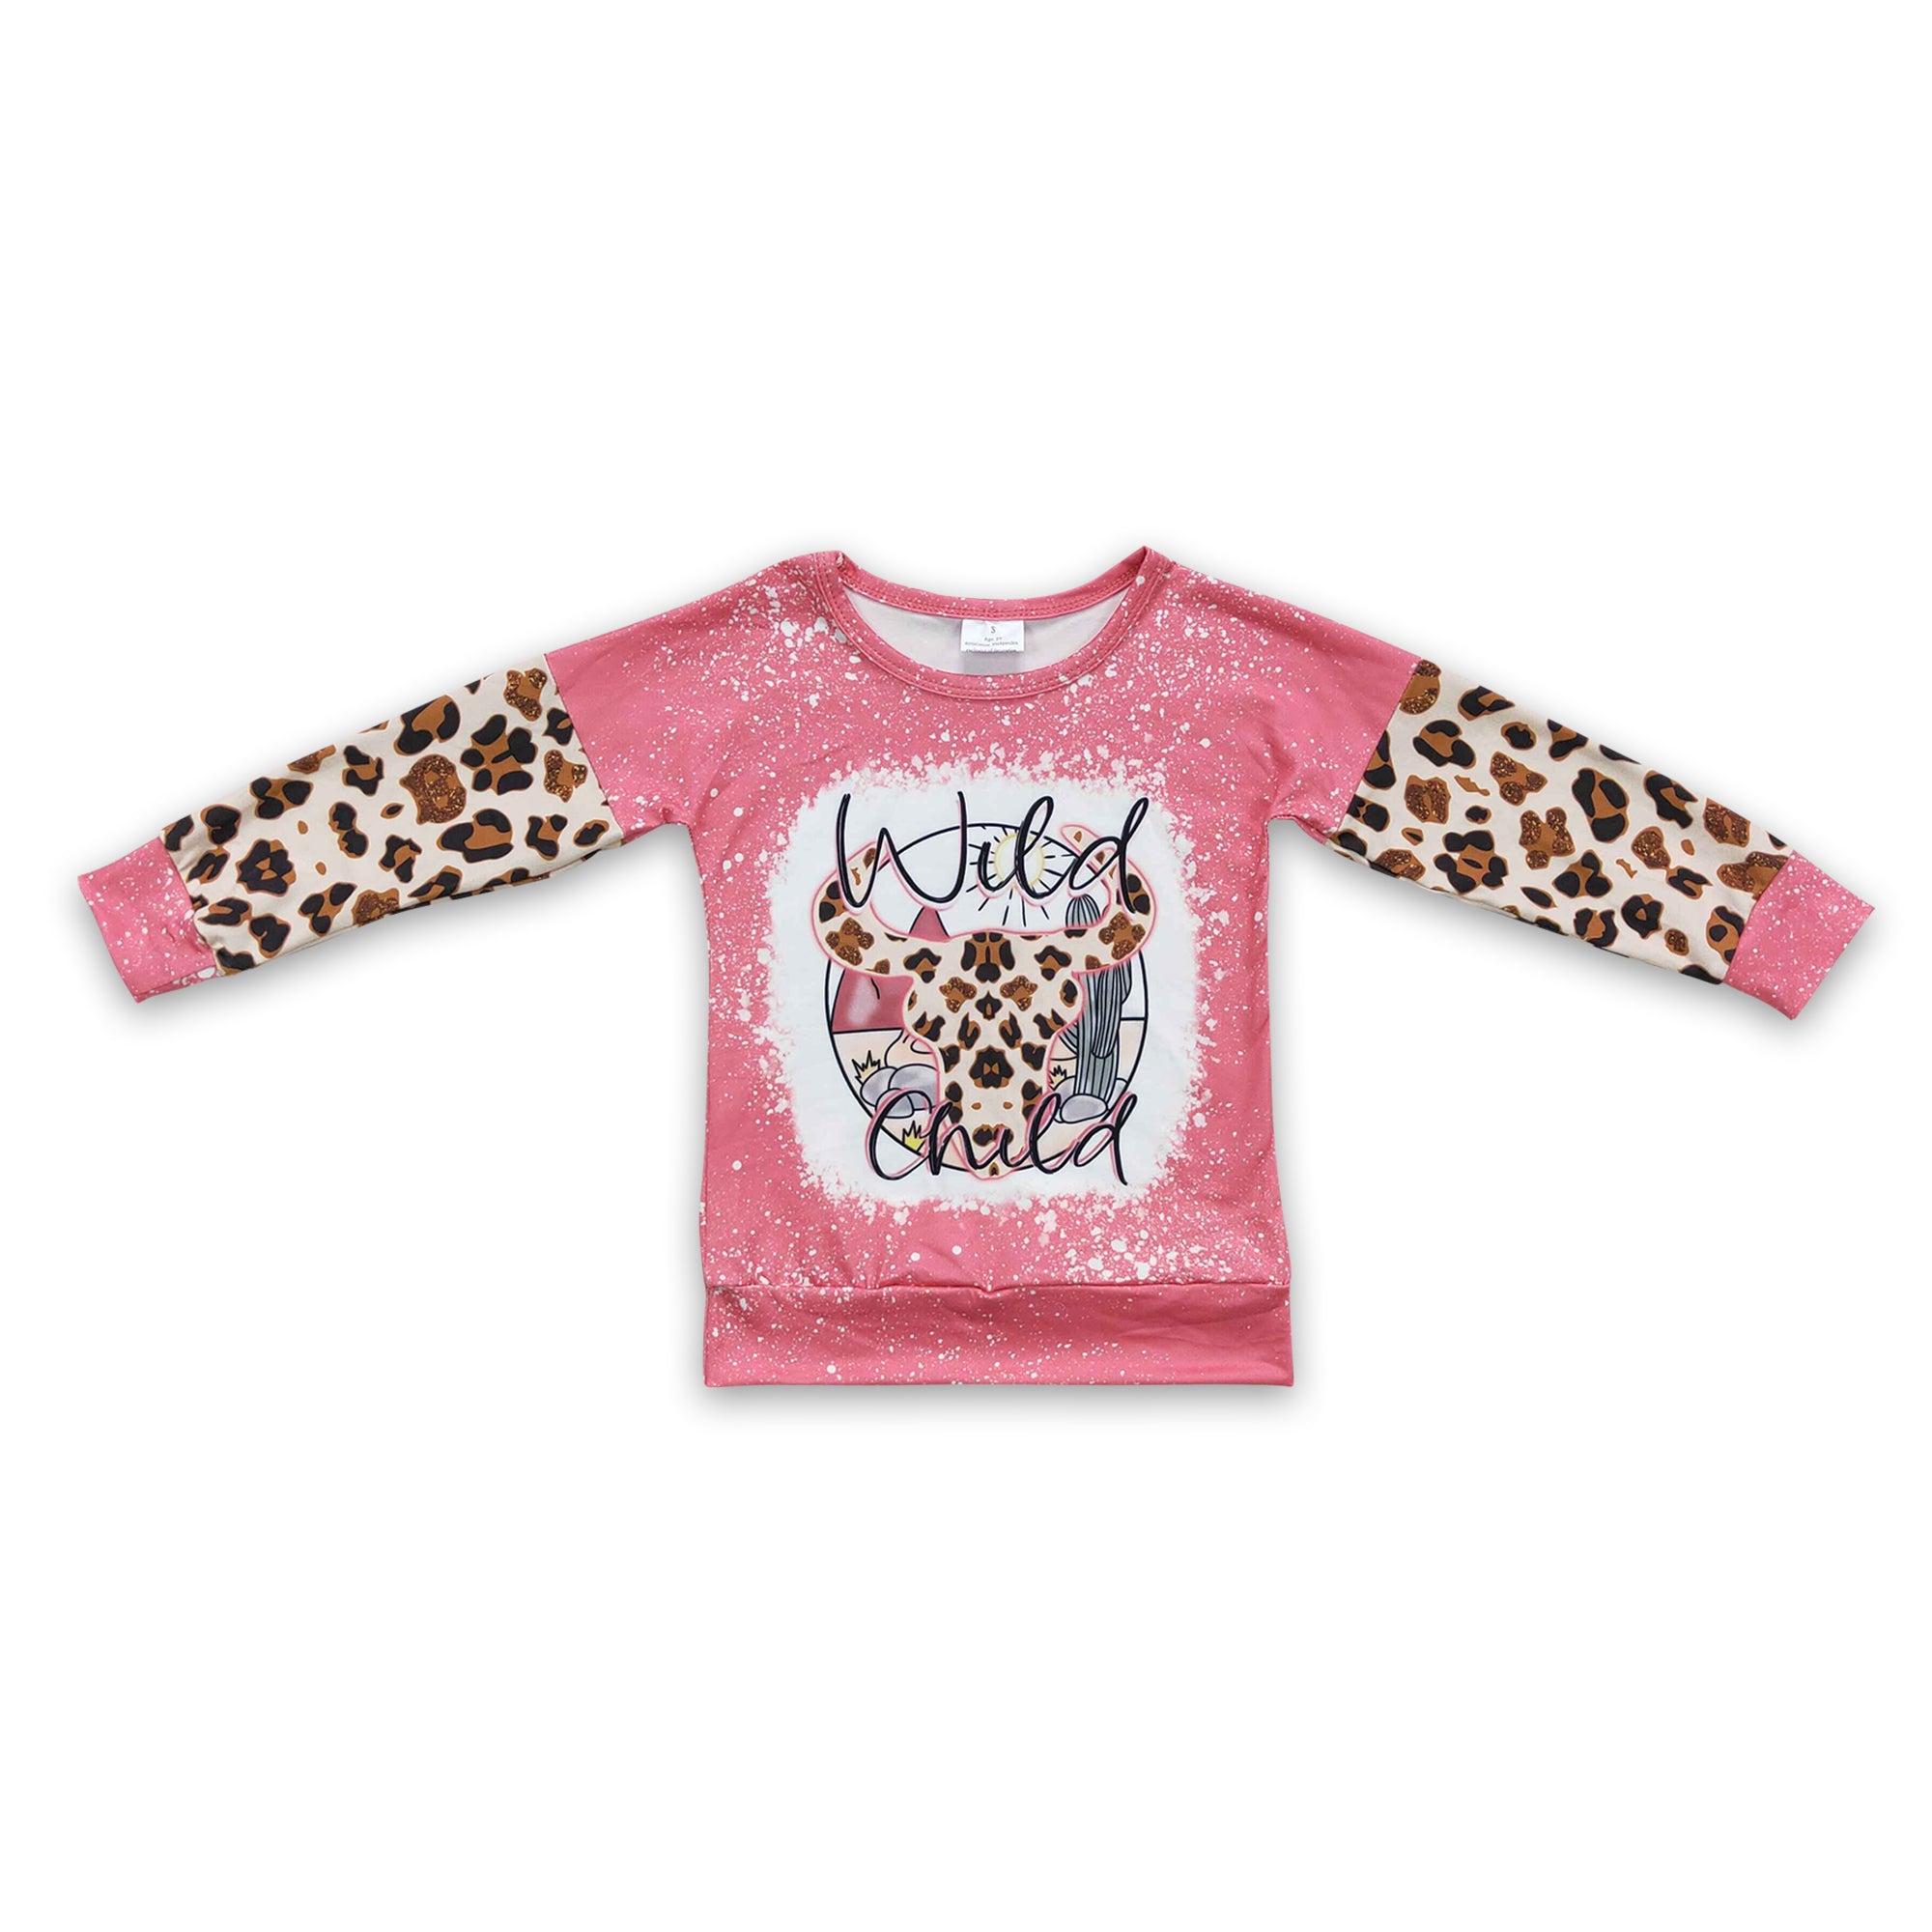 GT0083 toddler clothes cow wild child winter top shirt